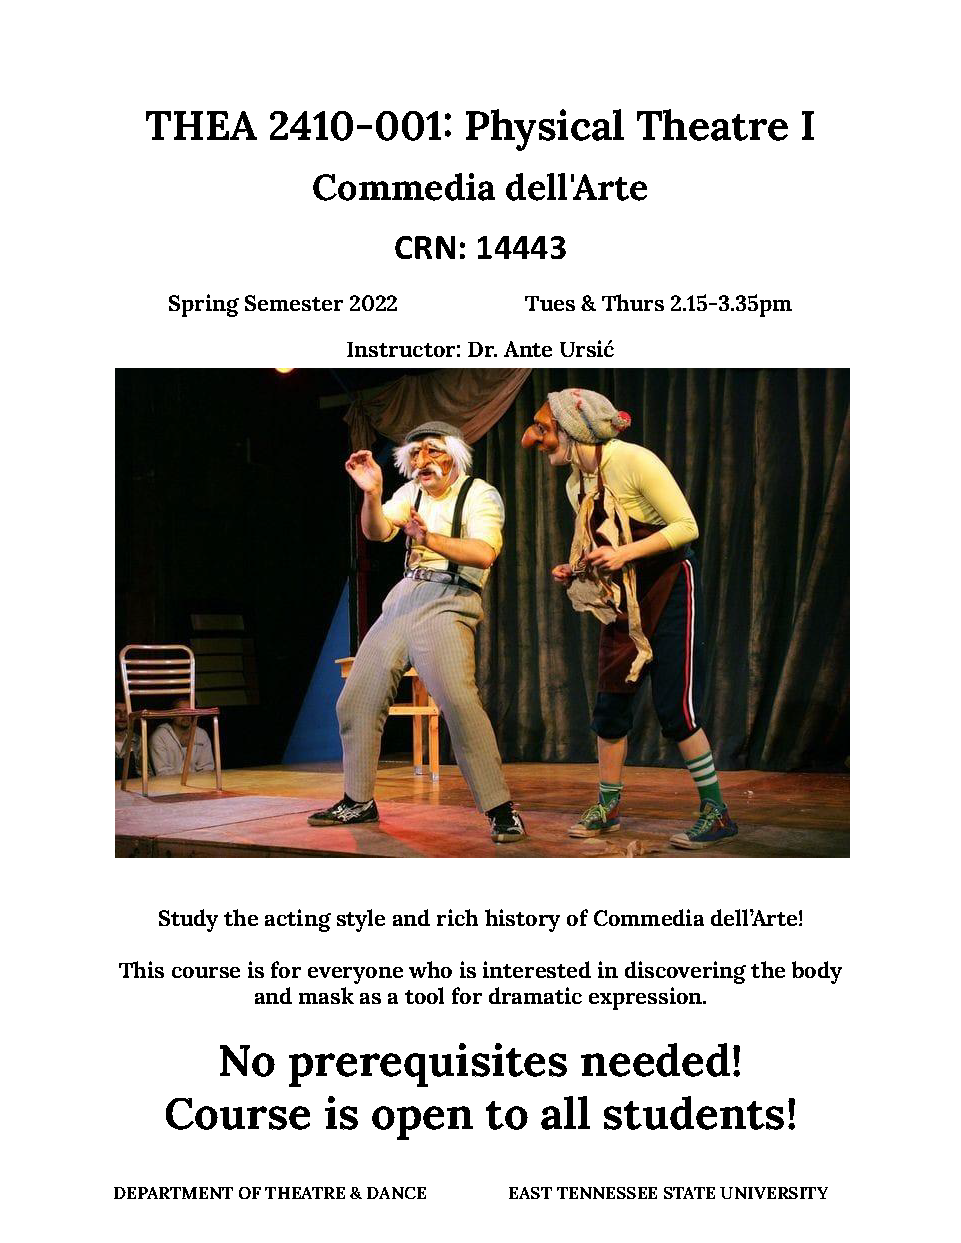 Commedia Dell Arte flyer with information detailed in the commentary above.